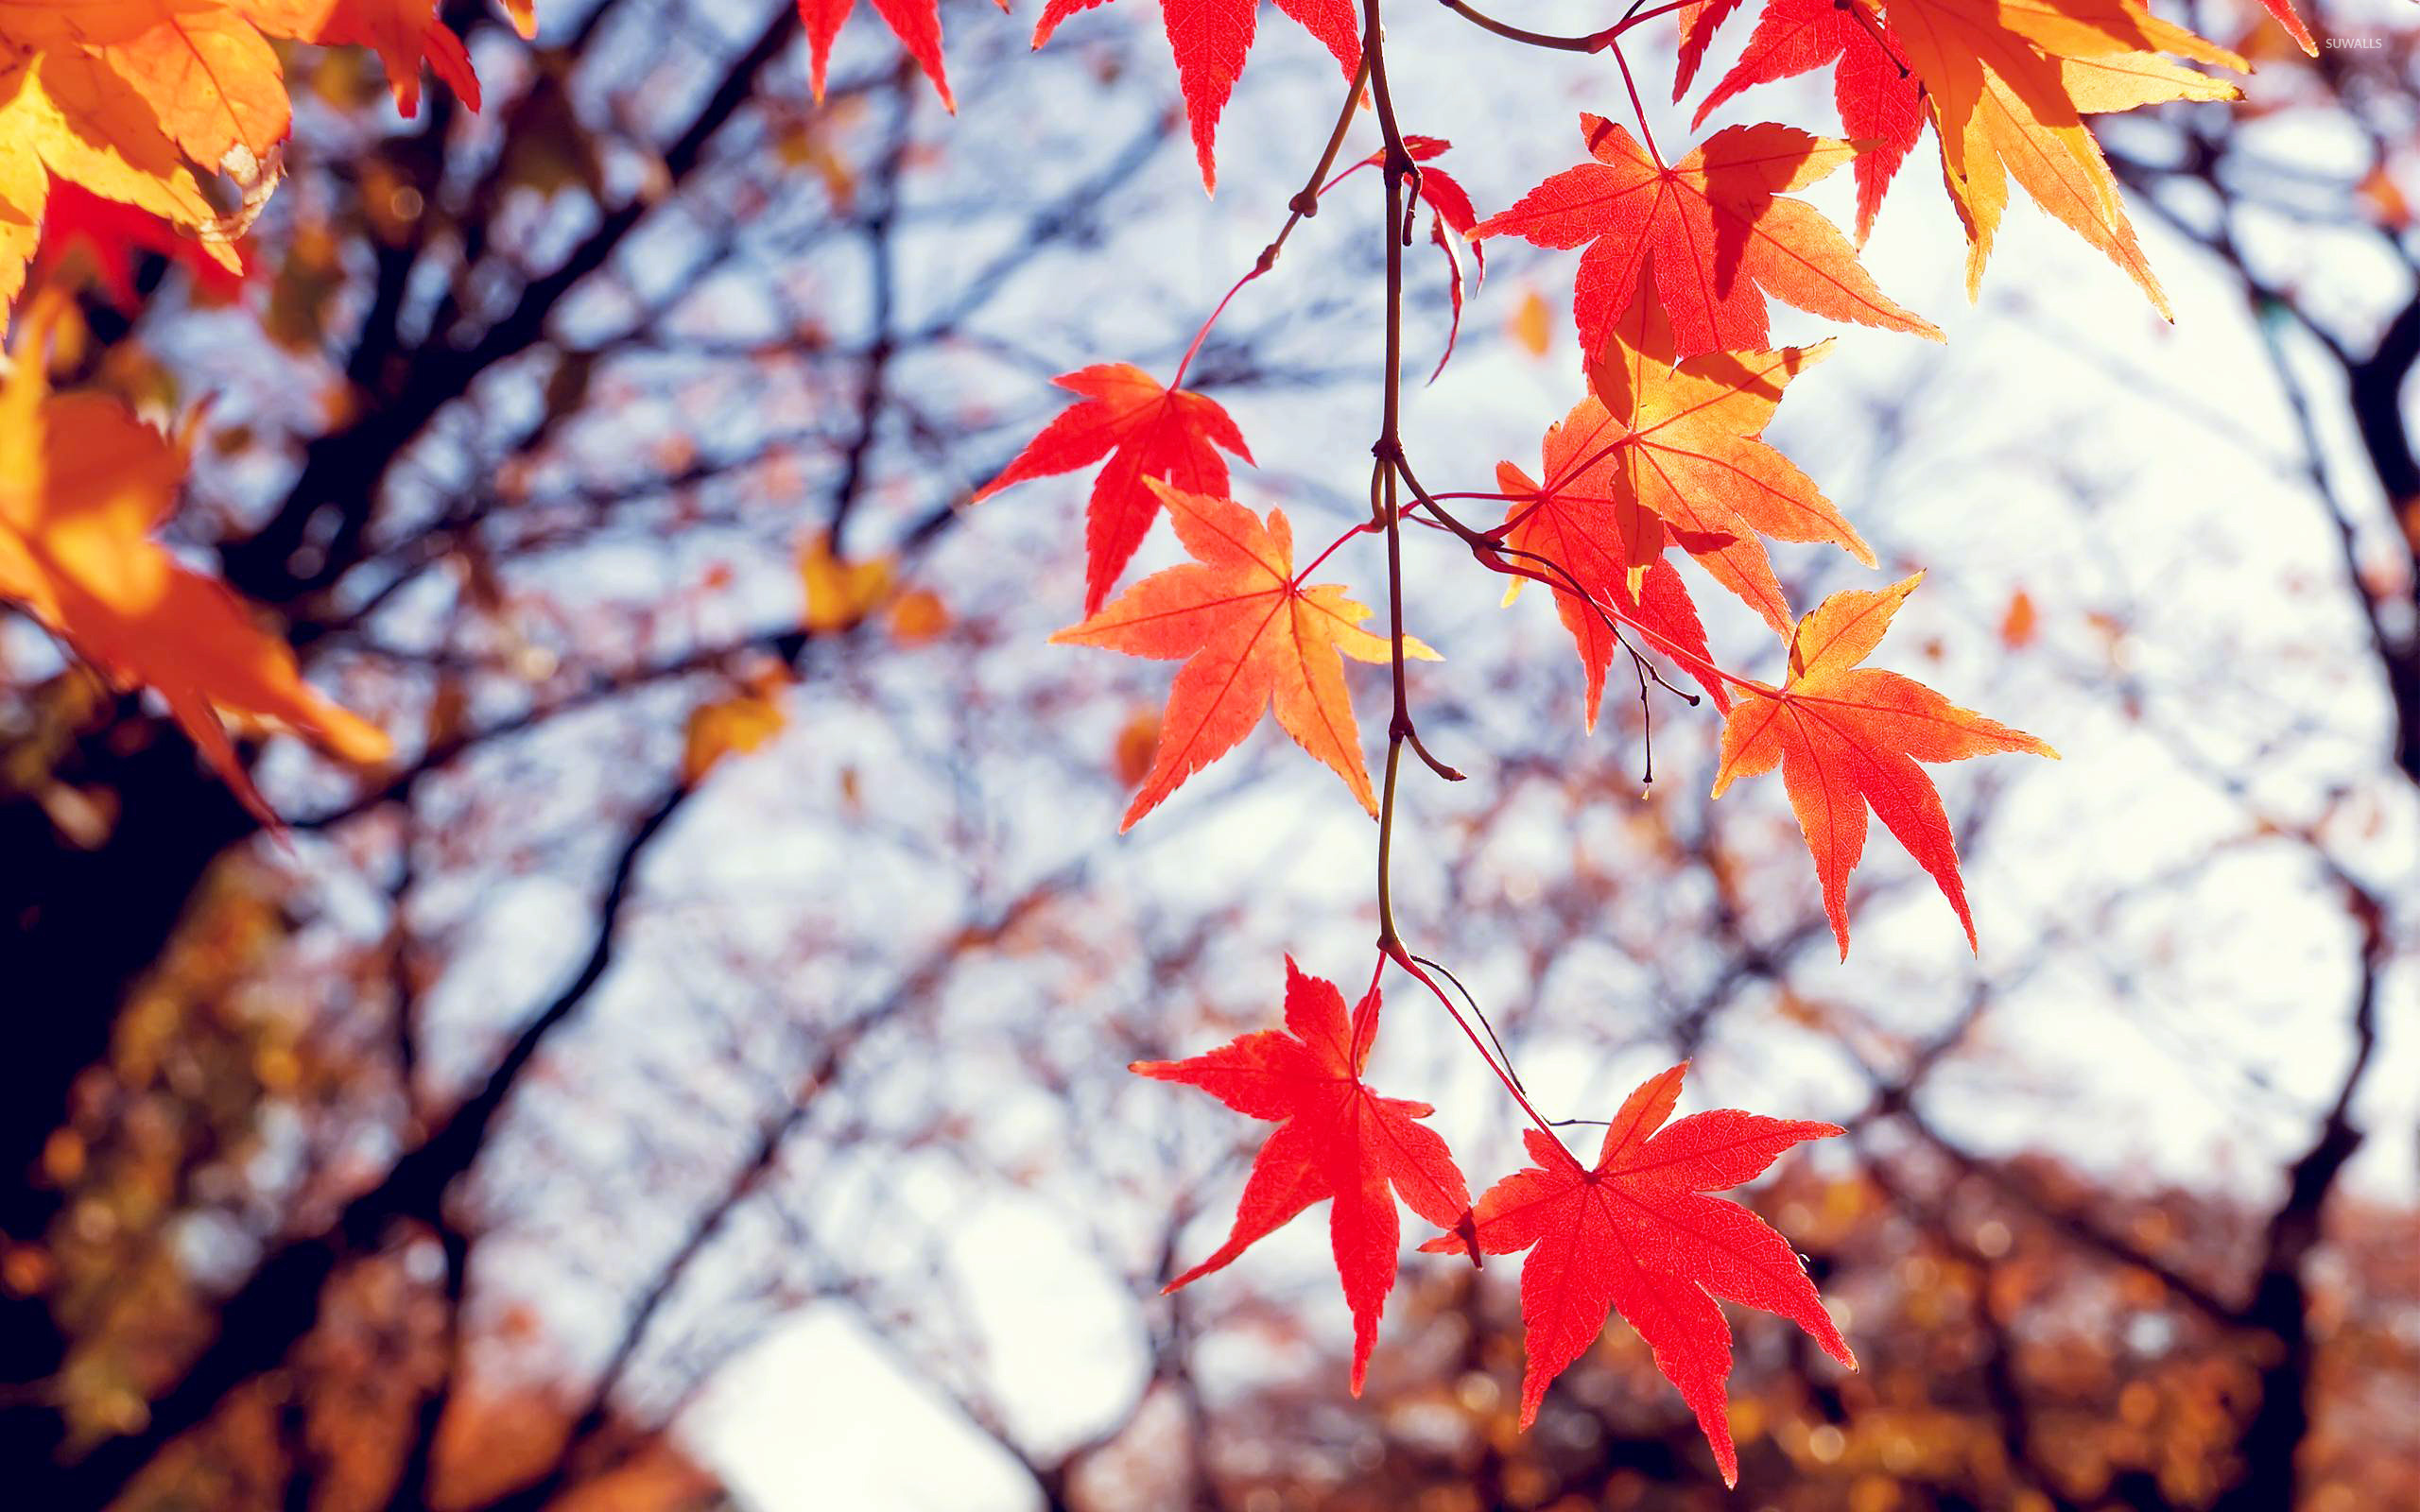 Red autumn leaves [2] wallpaper - Photography wallpapers - #14774